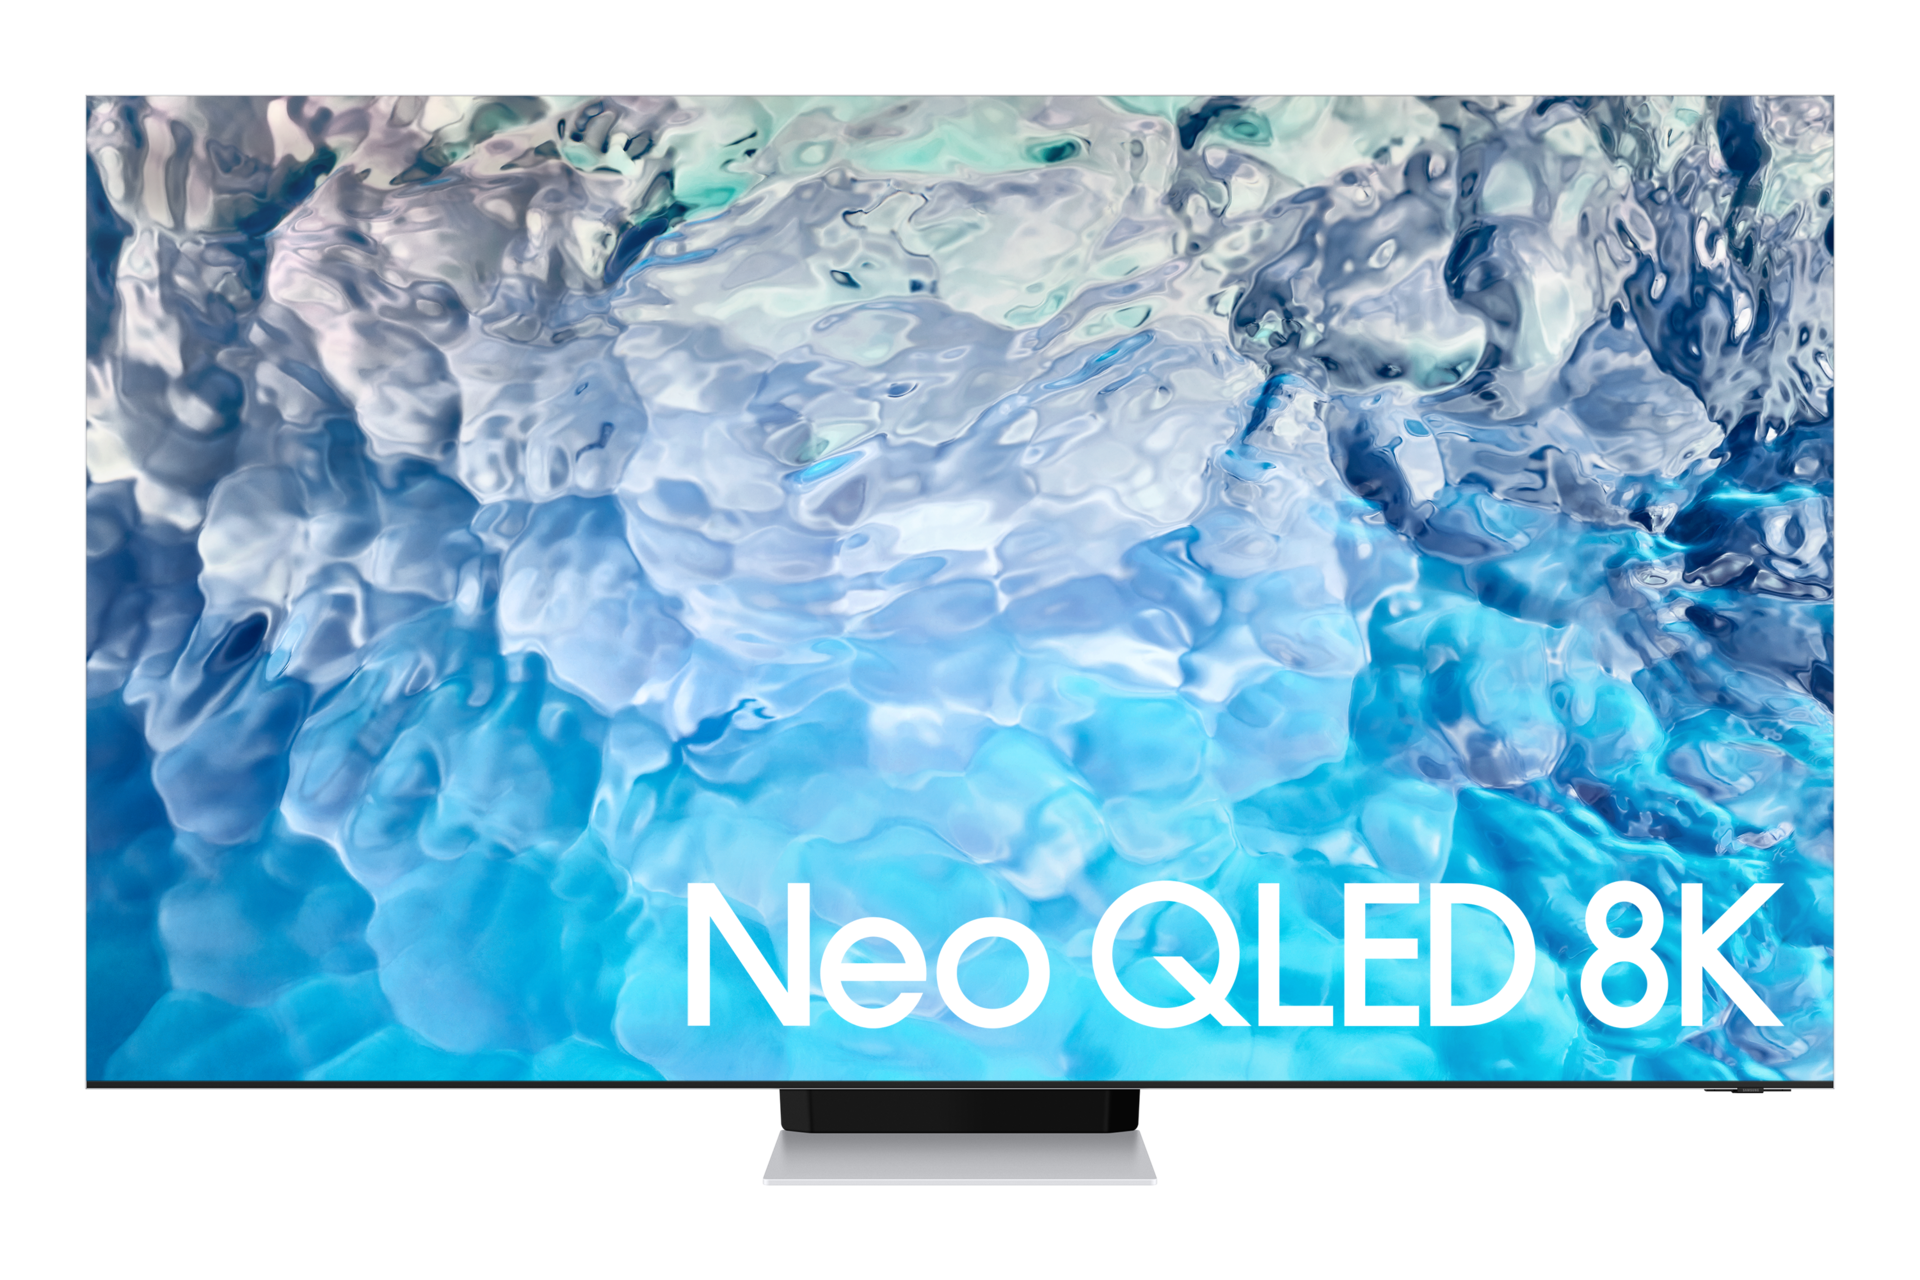 Samsung NEO QLED 8K QN900B is powered by Tizen OS with features such as screen mirroring, WiFi Direct, SmartThings, Smart Hub, and Voice Assistant. Check out the price and buy now.